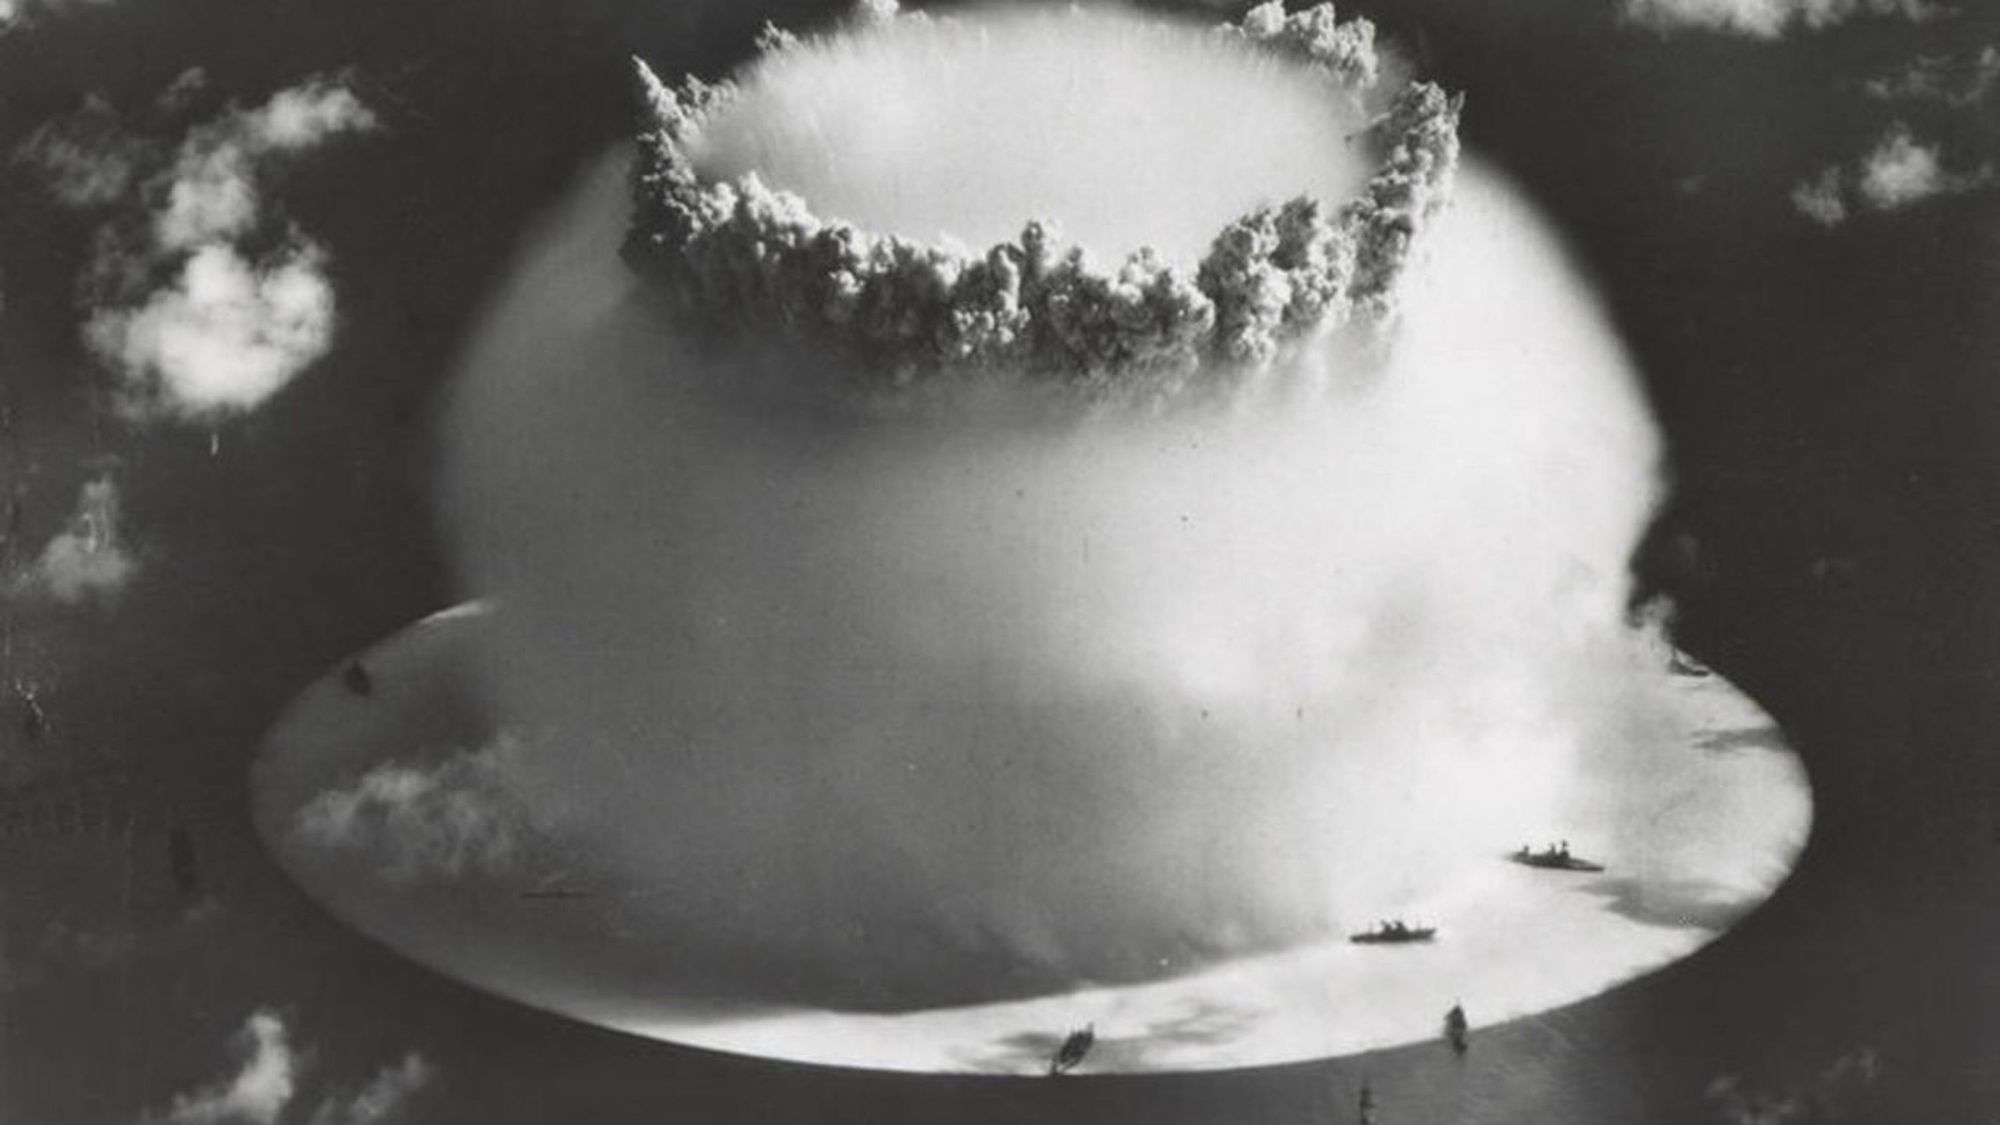 The Baker test, the second nuclear detonation of Operation Crossroads at Bikini Atoll, showing the white surface crack under the ships, and the top of the hollow spray column protruding through the hemispherical Wilson cloud.